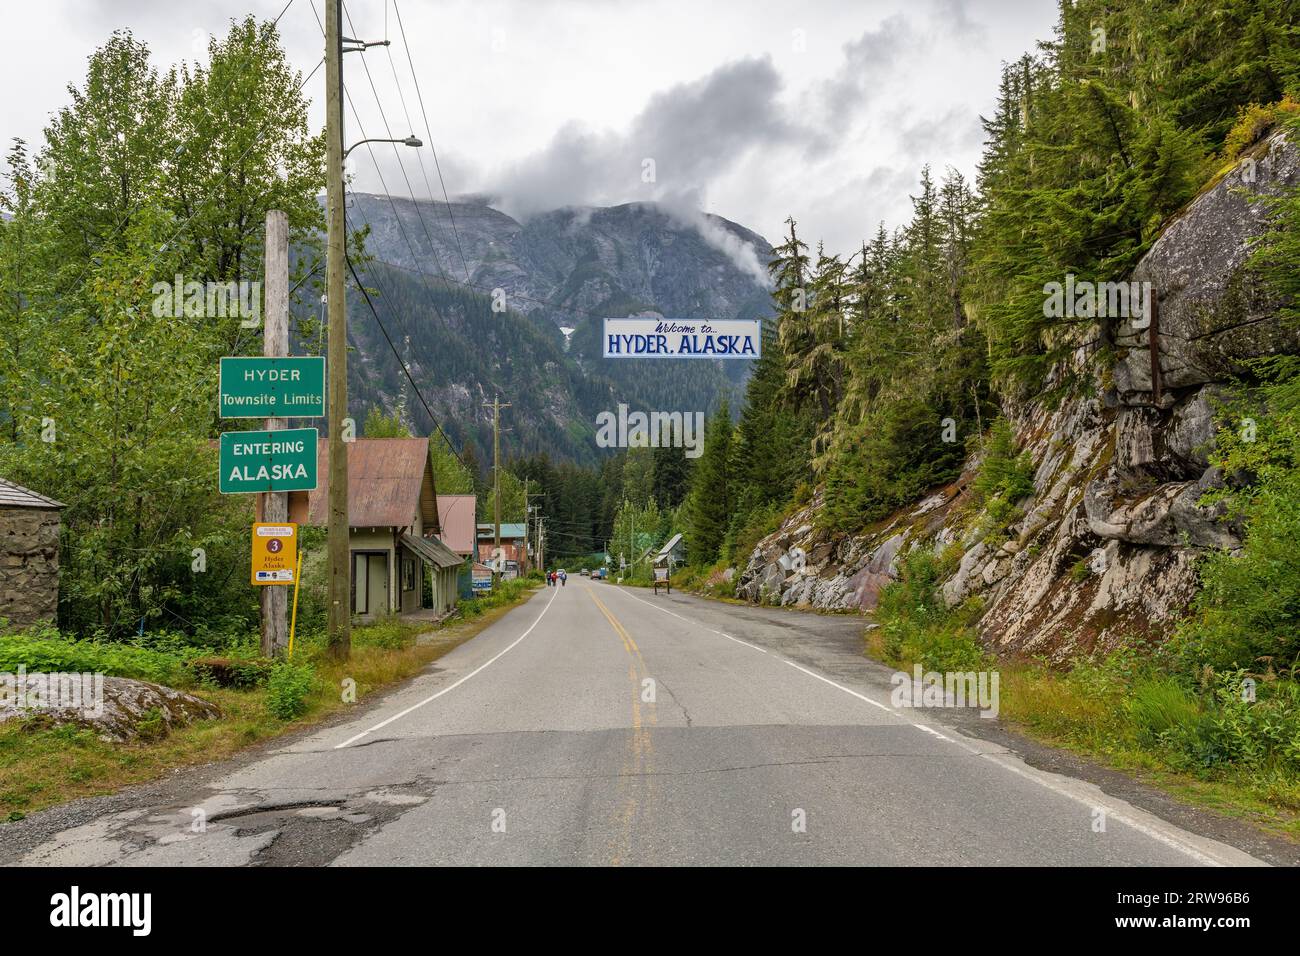 Entrance of Hyder town after the canadian american border crossing, Alaska, USA. Stock Photo